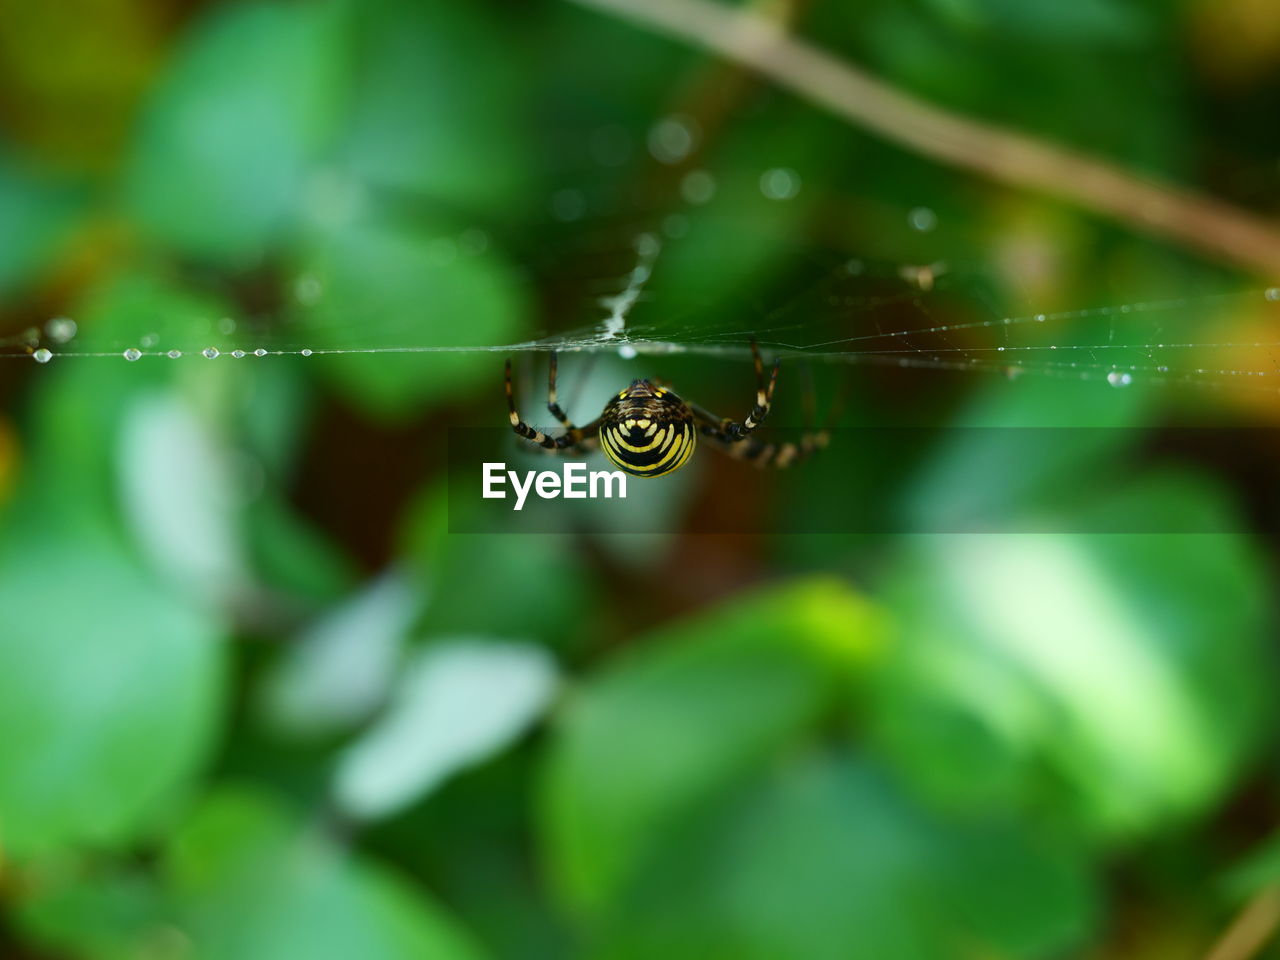 CLOSE-UP OF SPIDER AND WEB